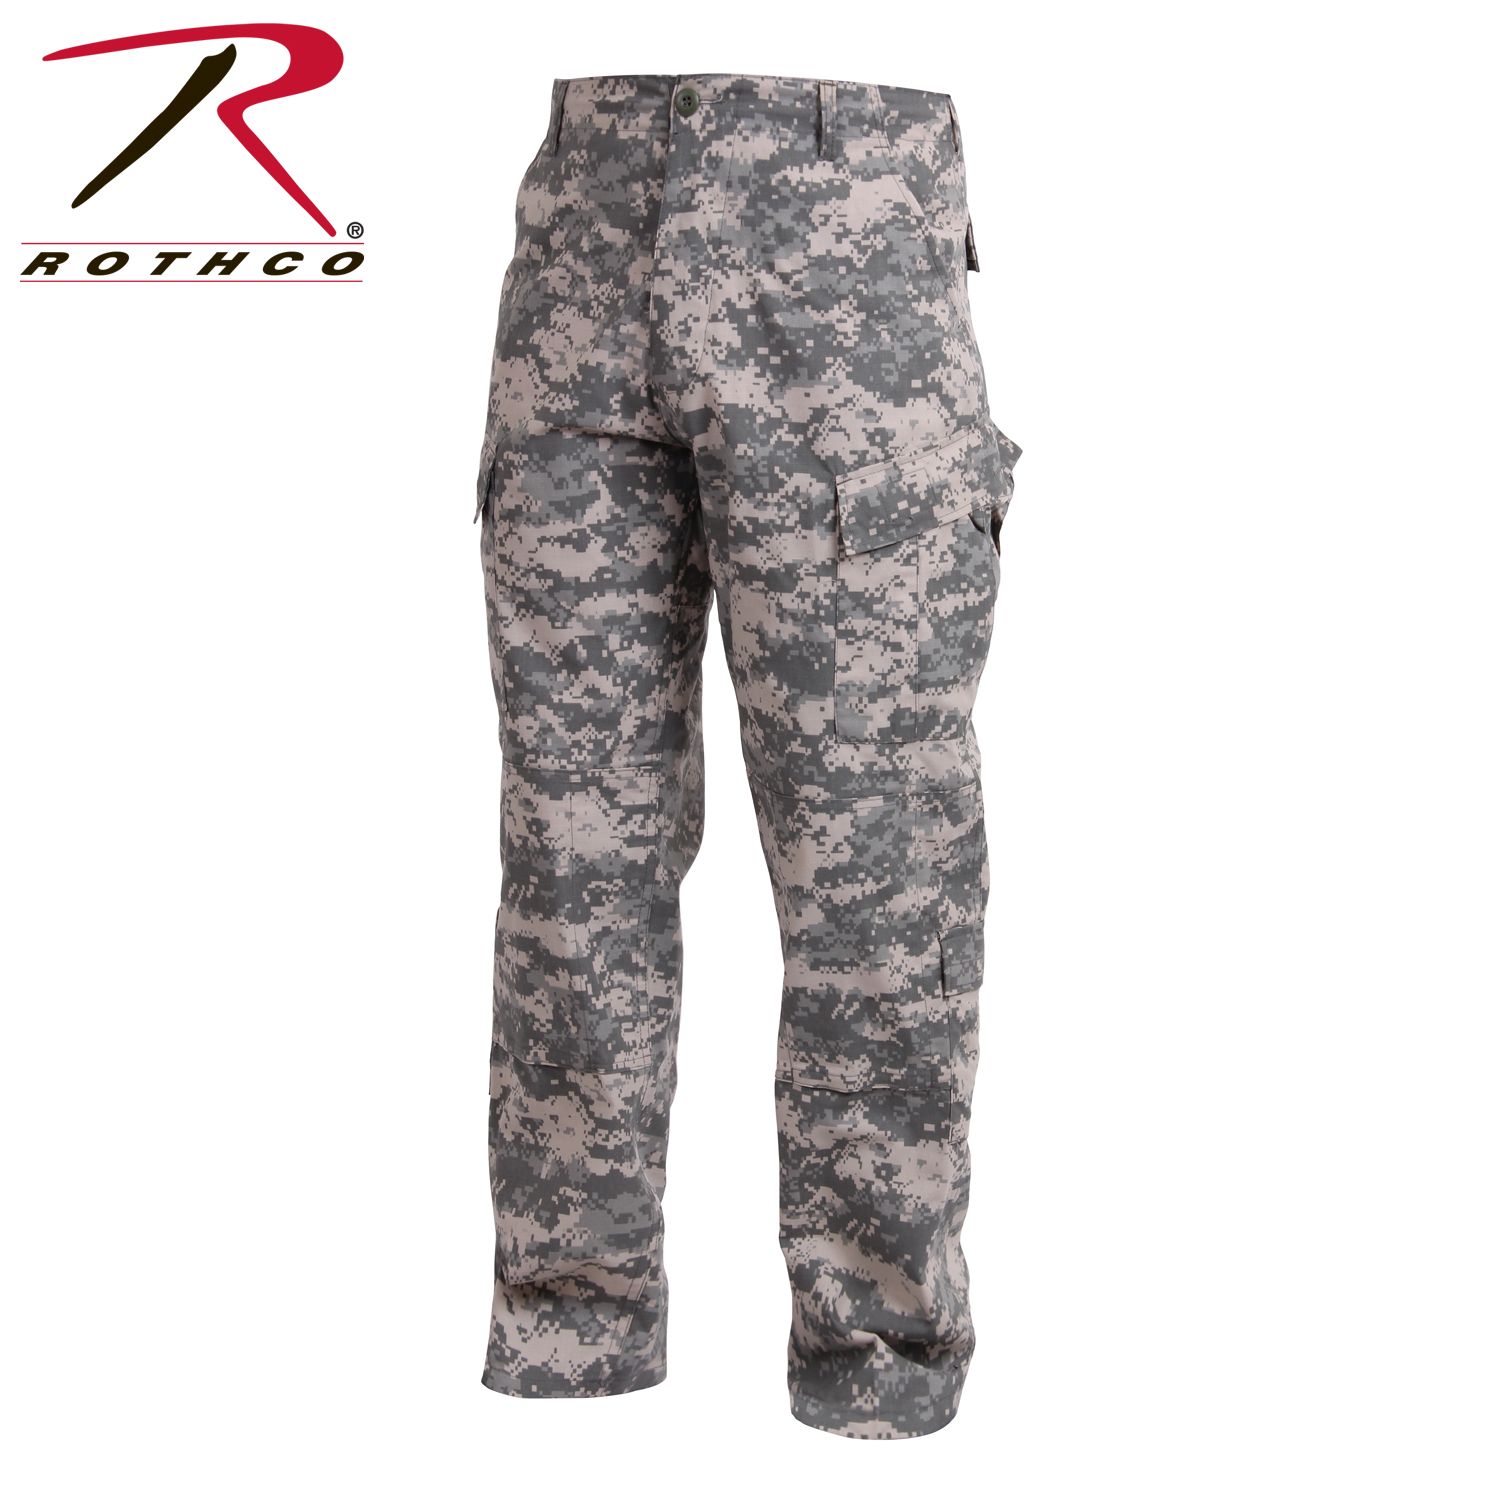 Buy 5757_Rothco Camo Army Combat Uniform Pants - Rothco Online at Best  price - CA